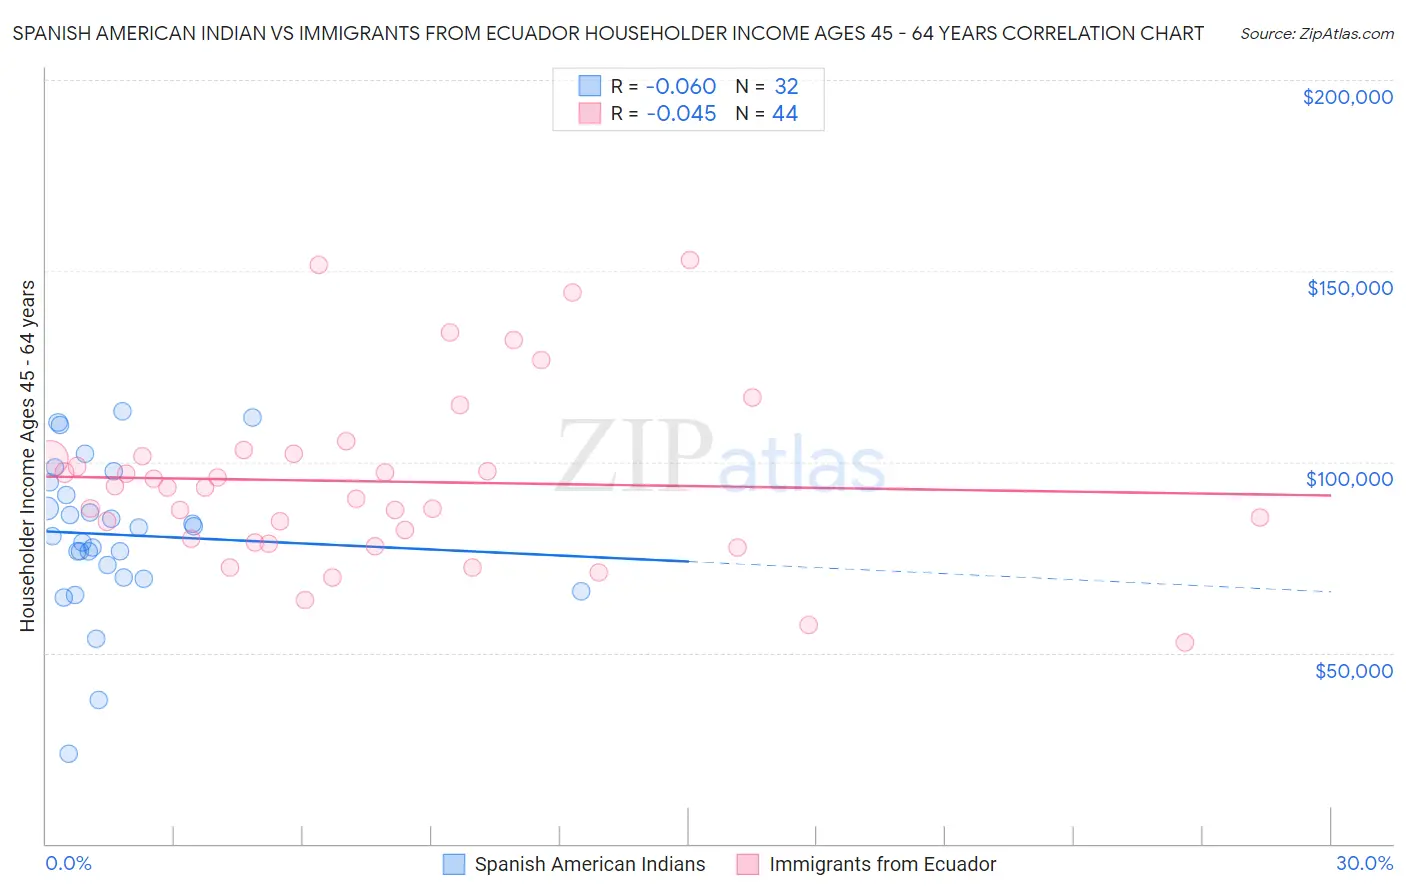 Spanish American Indian vs Immigrants from Ecuador Householder Income Ages 45 - 64 years